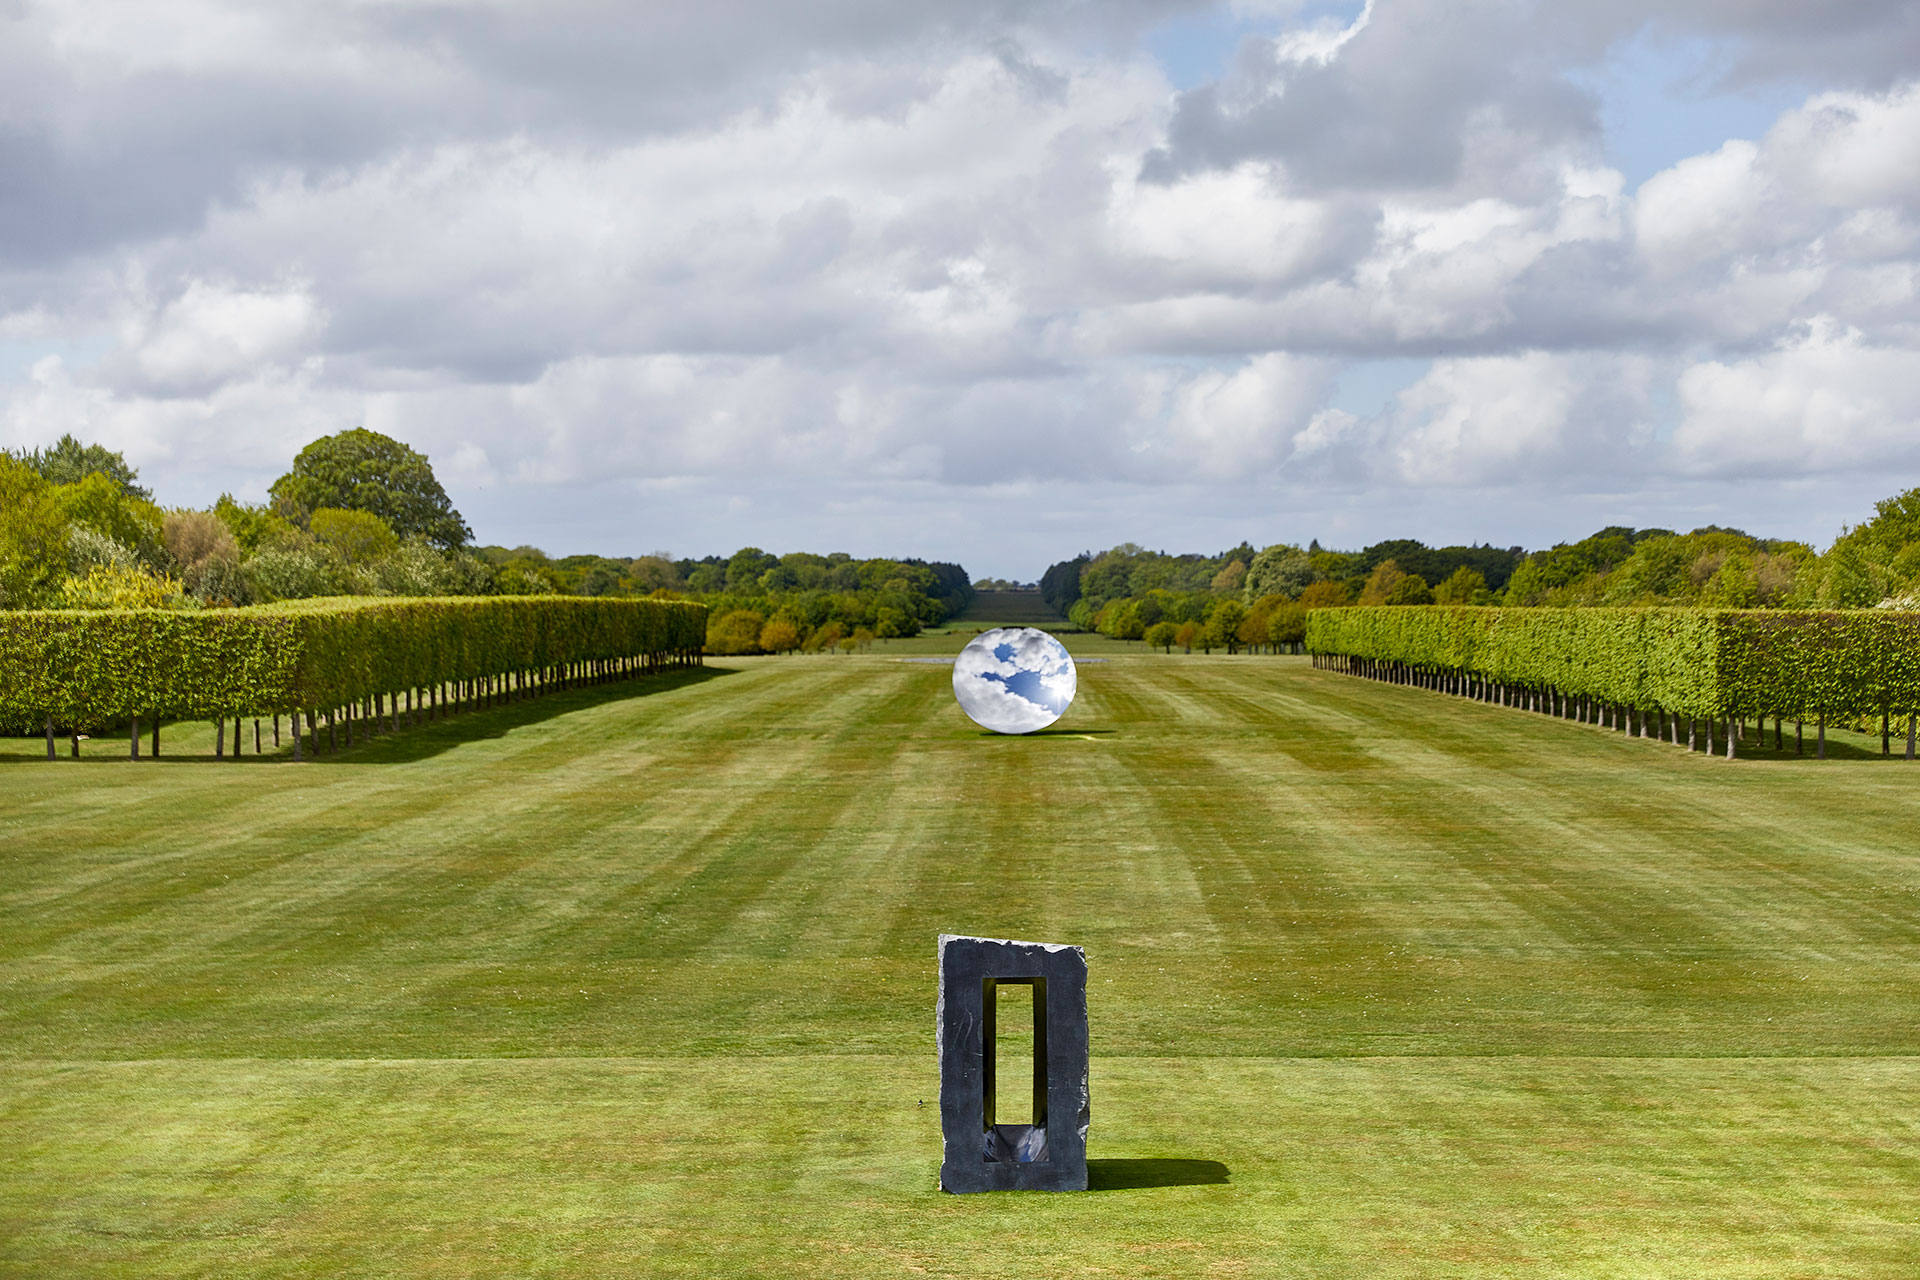 Exhibition view, Anish Kapoor at Houghton Hall. © Anish Kapoor. All rights reserved DACS, 2020. Photo by Pete Huggins.
Featured: Untitled, 1997, Kilkenny limestone. Courtesy the artist. Sky Mirror, 2018, stainless steel. Courtesy the artist and Lisson Gallery.